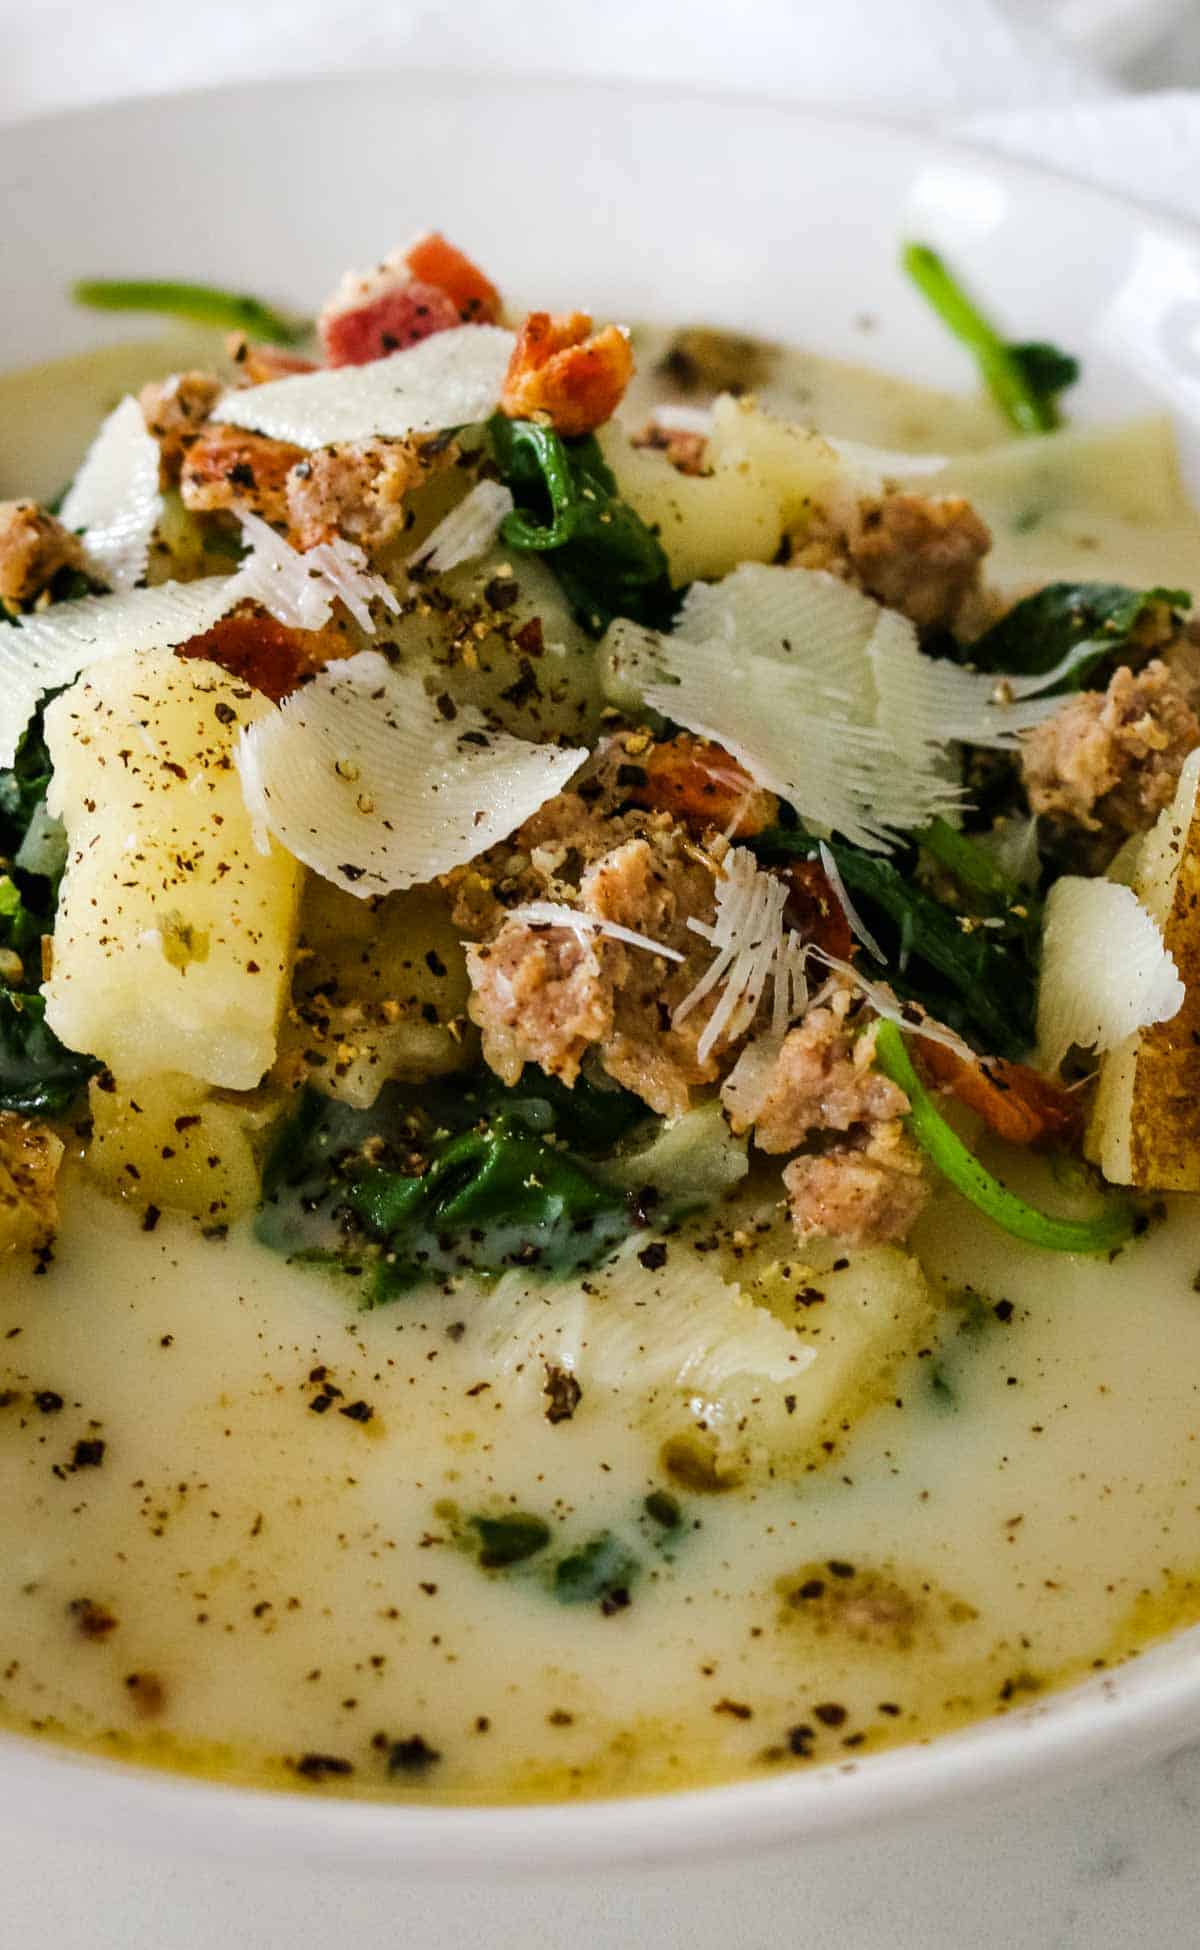 sauage, potatoes and parmesan in a bowl with creamy broth.